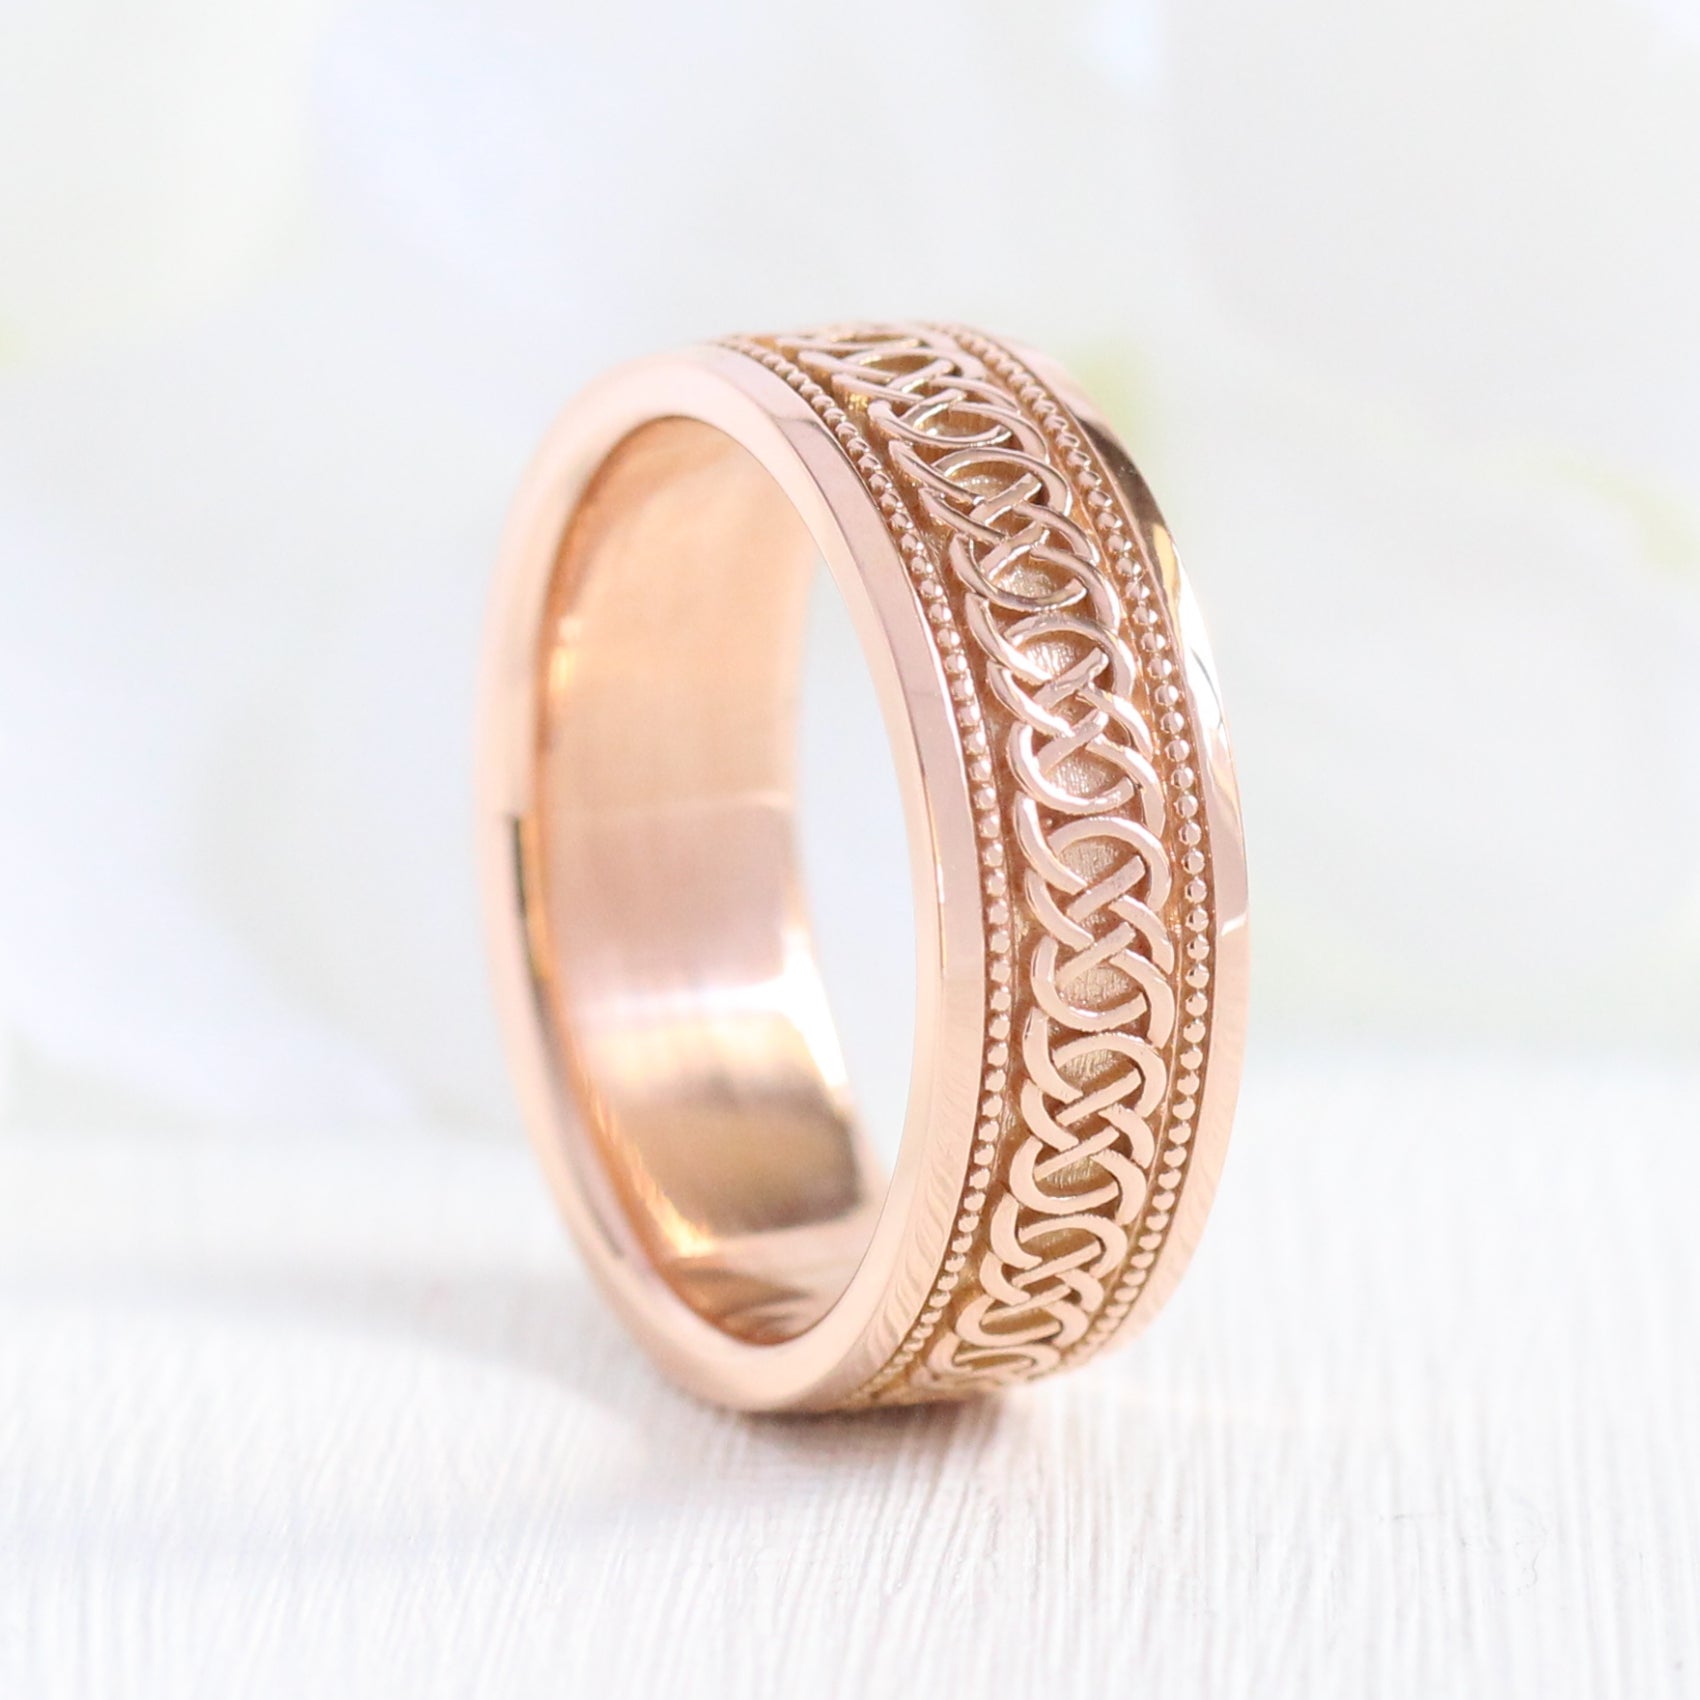 Eternity Celtic Knot Ring 7mm in Solid Gold Men’s Wedding Band